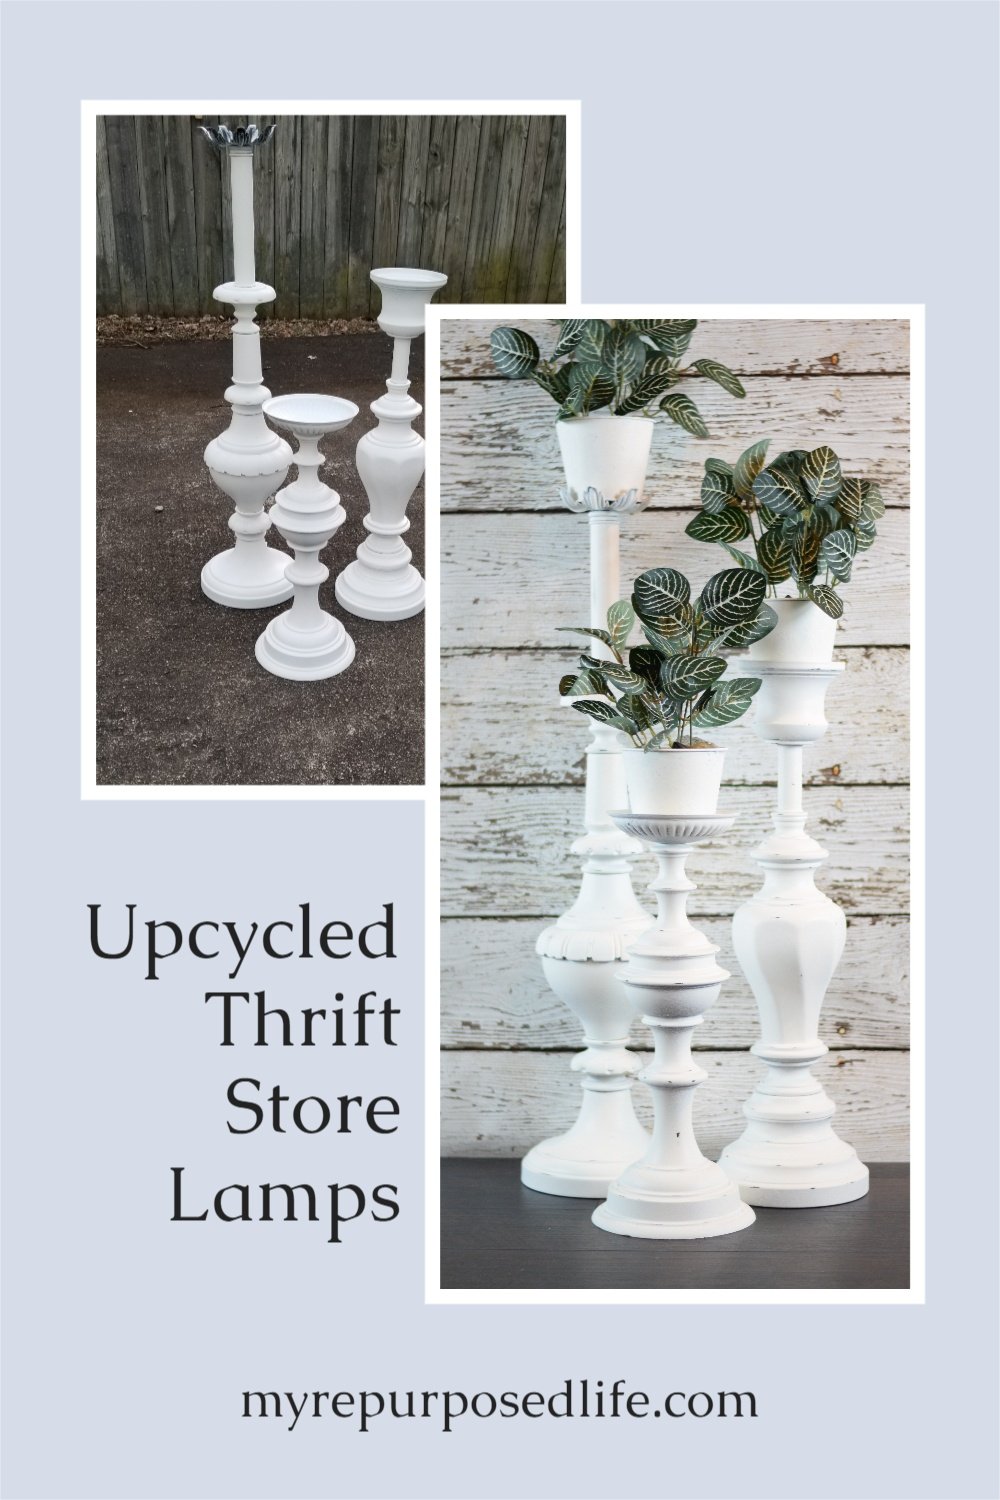 These repurposed lamp bases are fun and easy to make. The metal plant stands can also be used for candles. Great for indoors or outdoors. Easy step by step directions on how to dismantle and add parts. #MyRepurposedLife #upcycle #lamps #plantstands via @repurposedlife